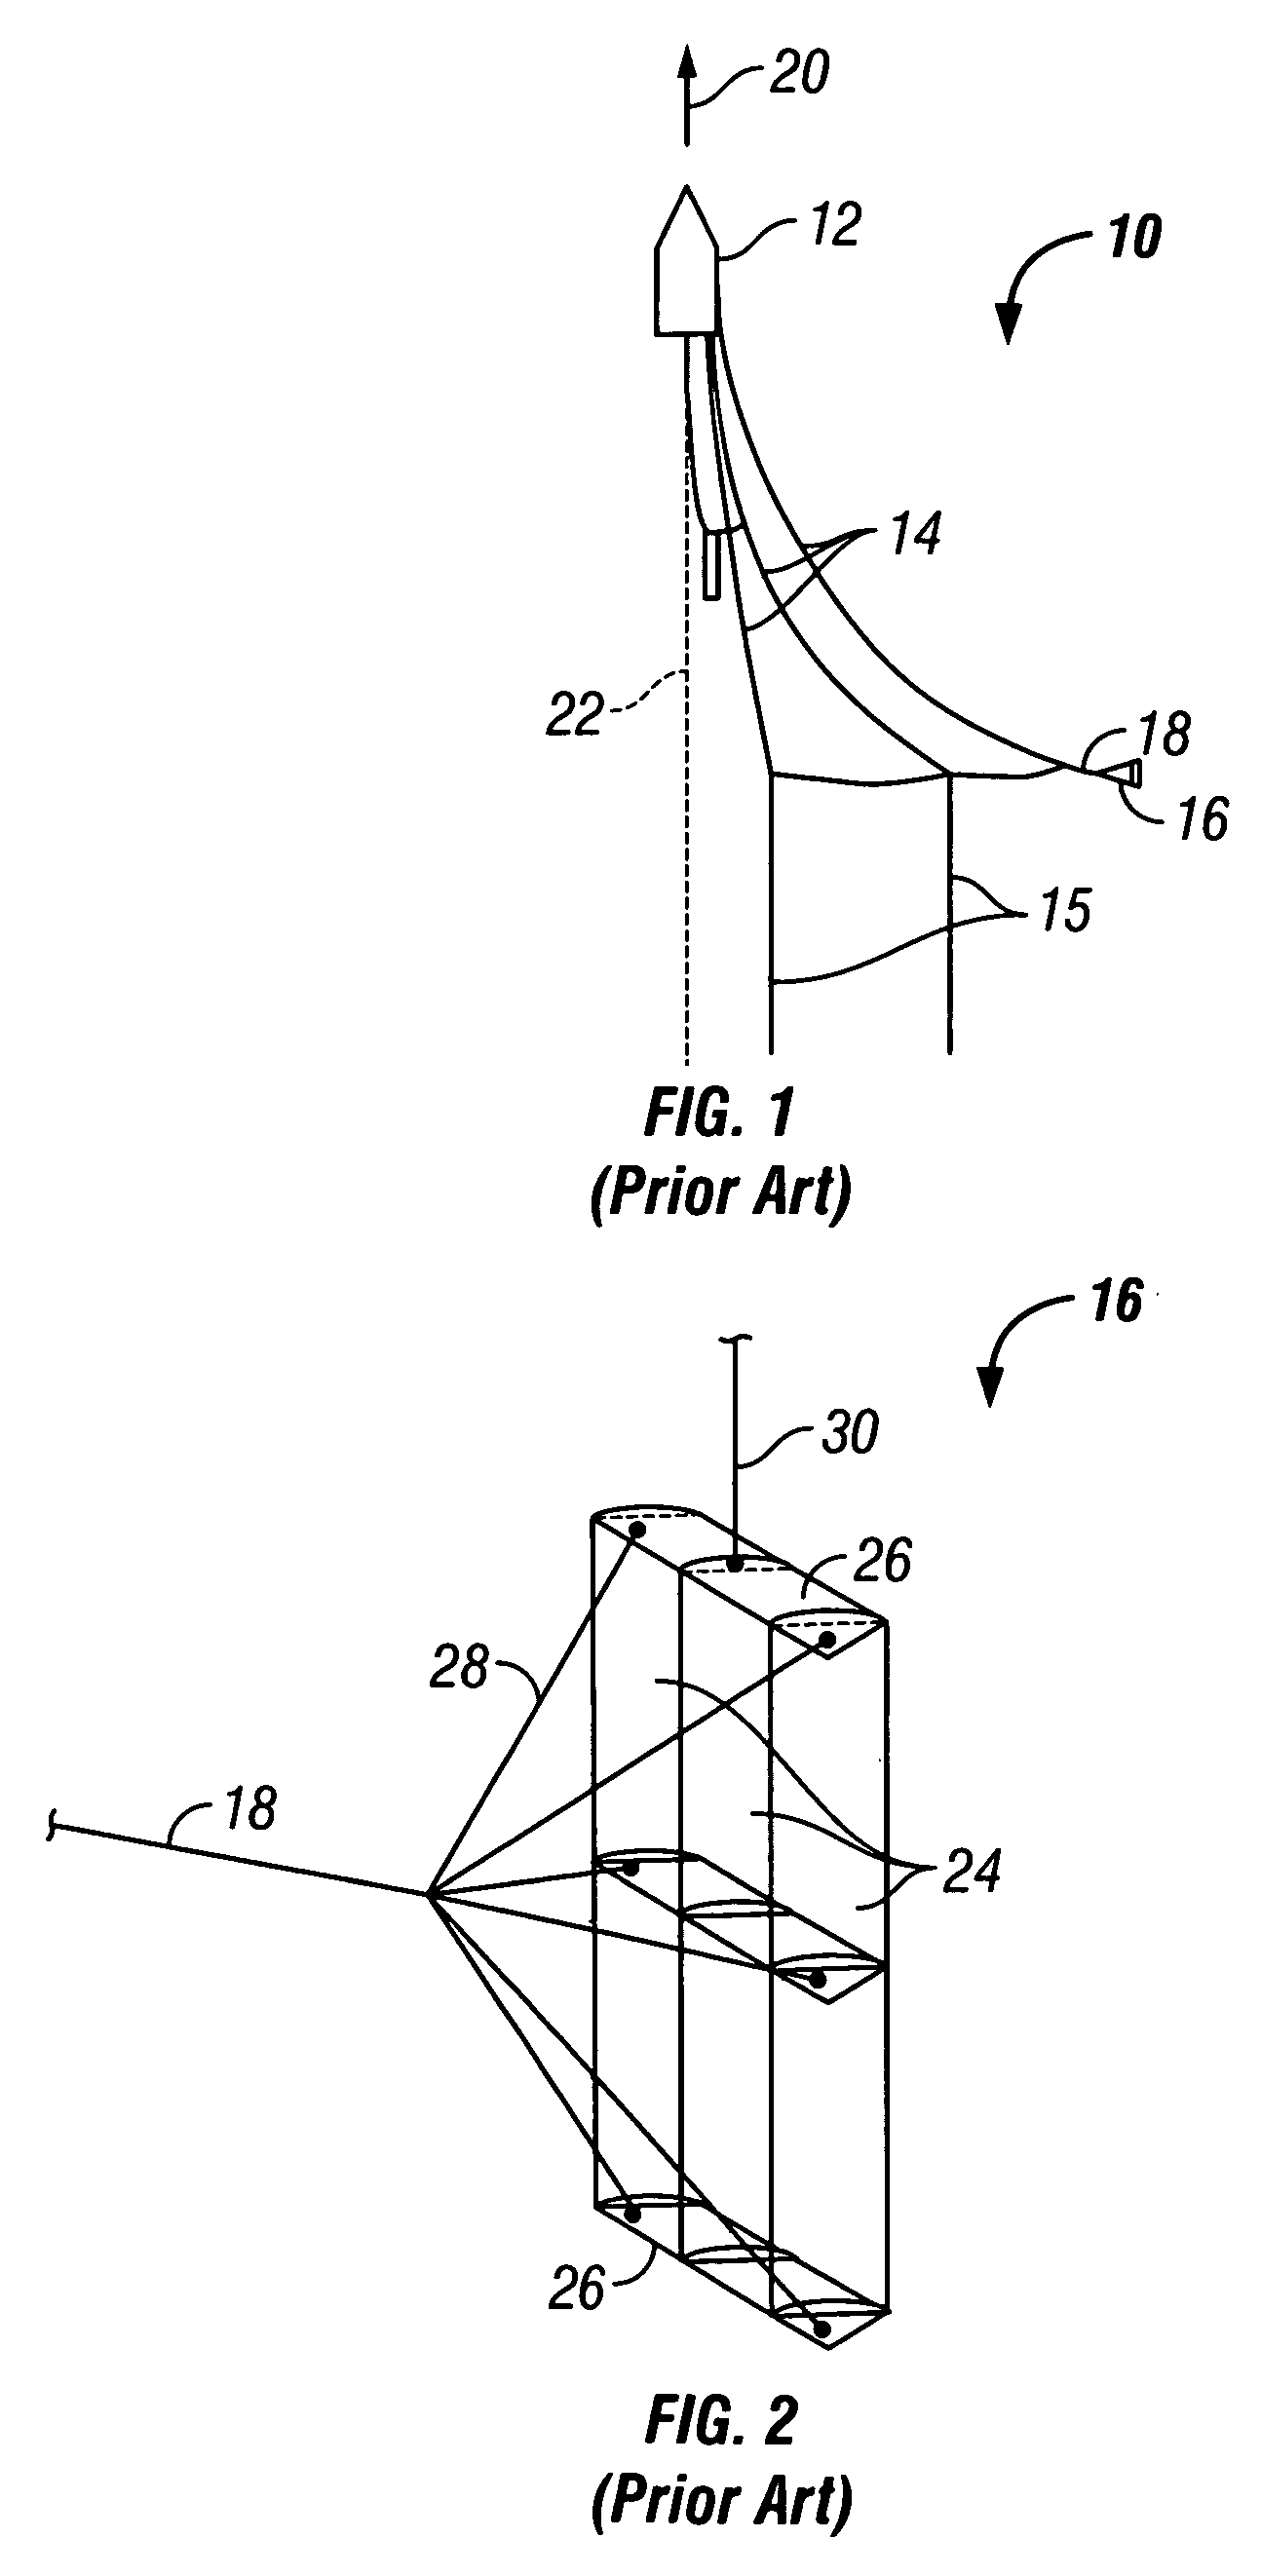 System for depth control of a marine deflector